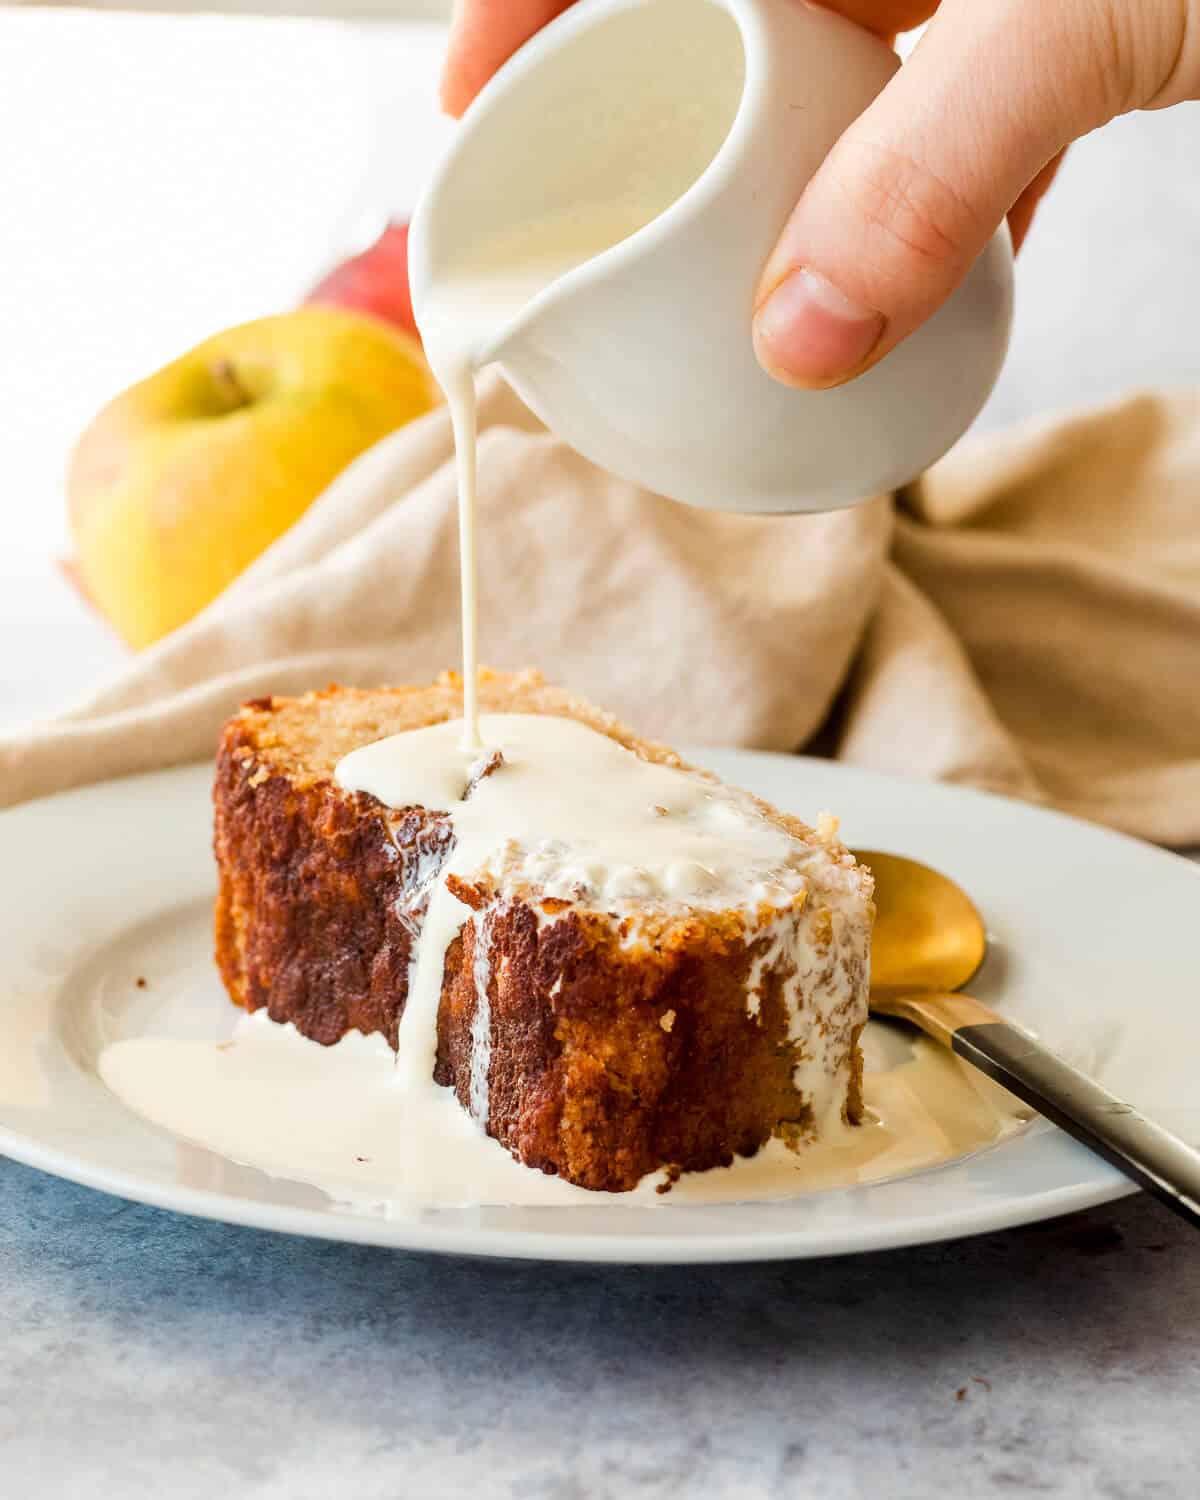 A slice of Apple and Cinnamon Cake on a white plate, someone is pouring cream on the cake from a white jug. There is an appl ein the background and a teaspoon on the plate.